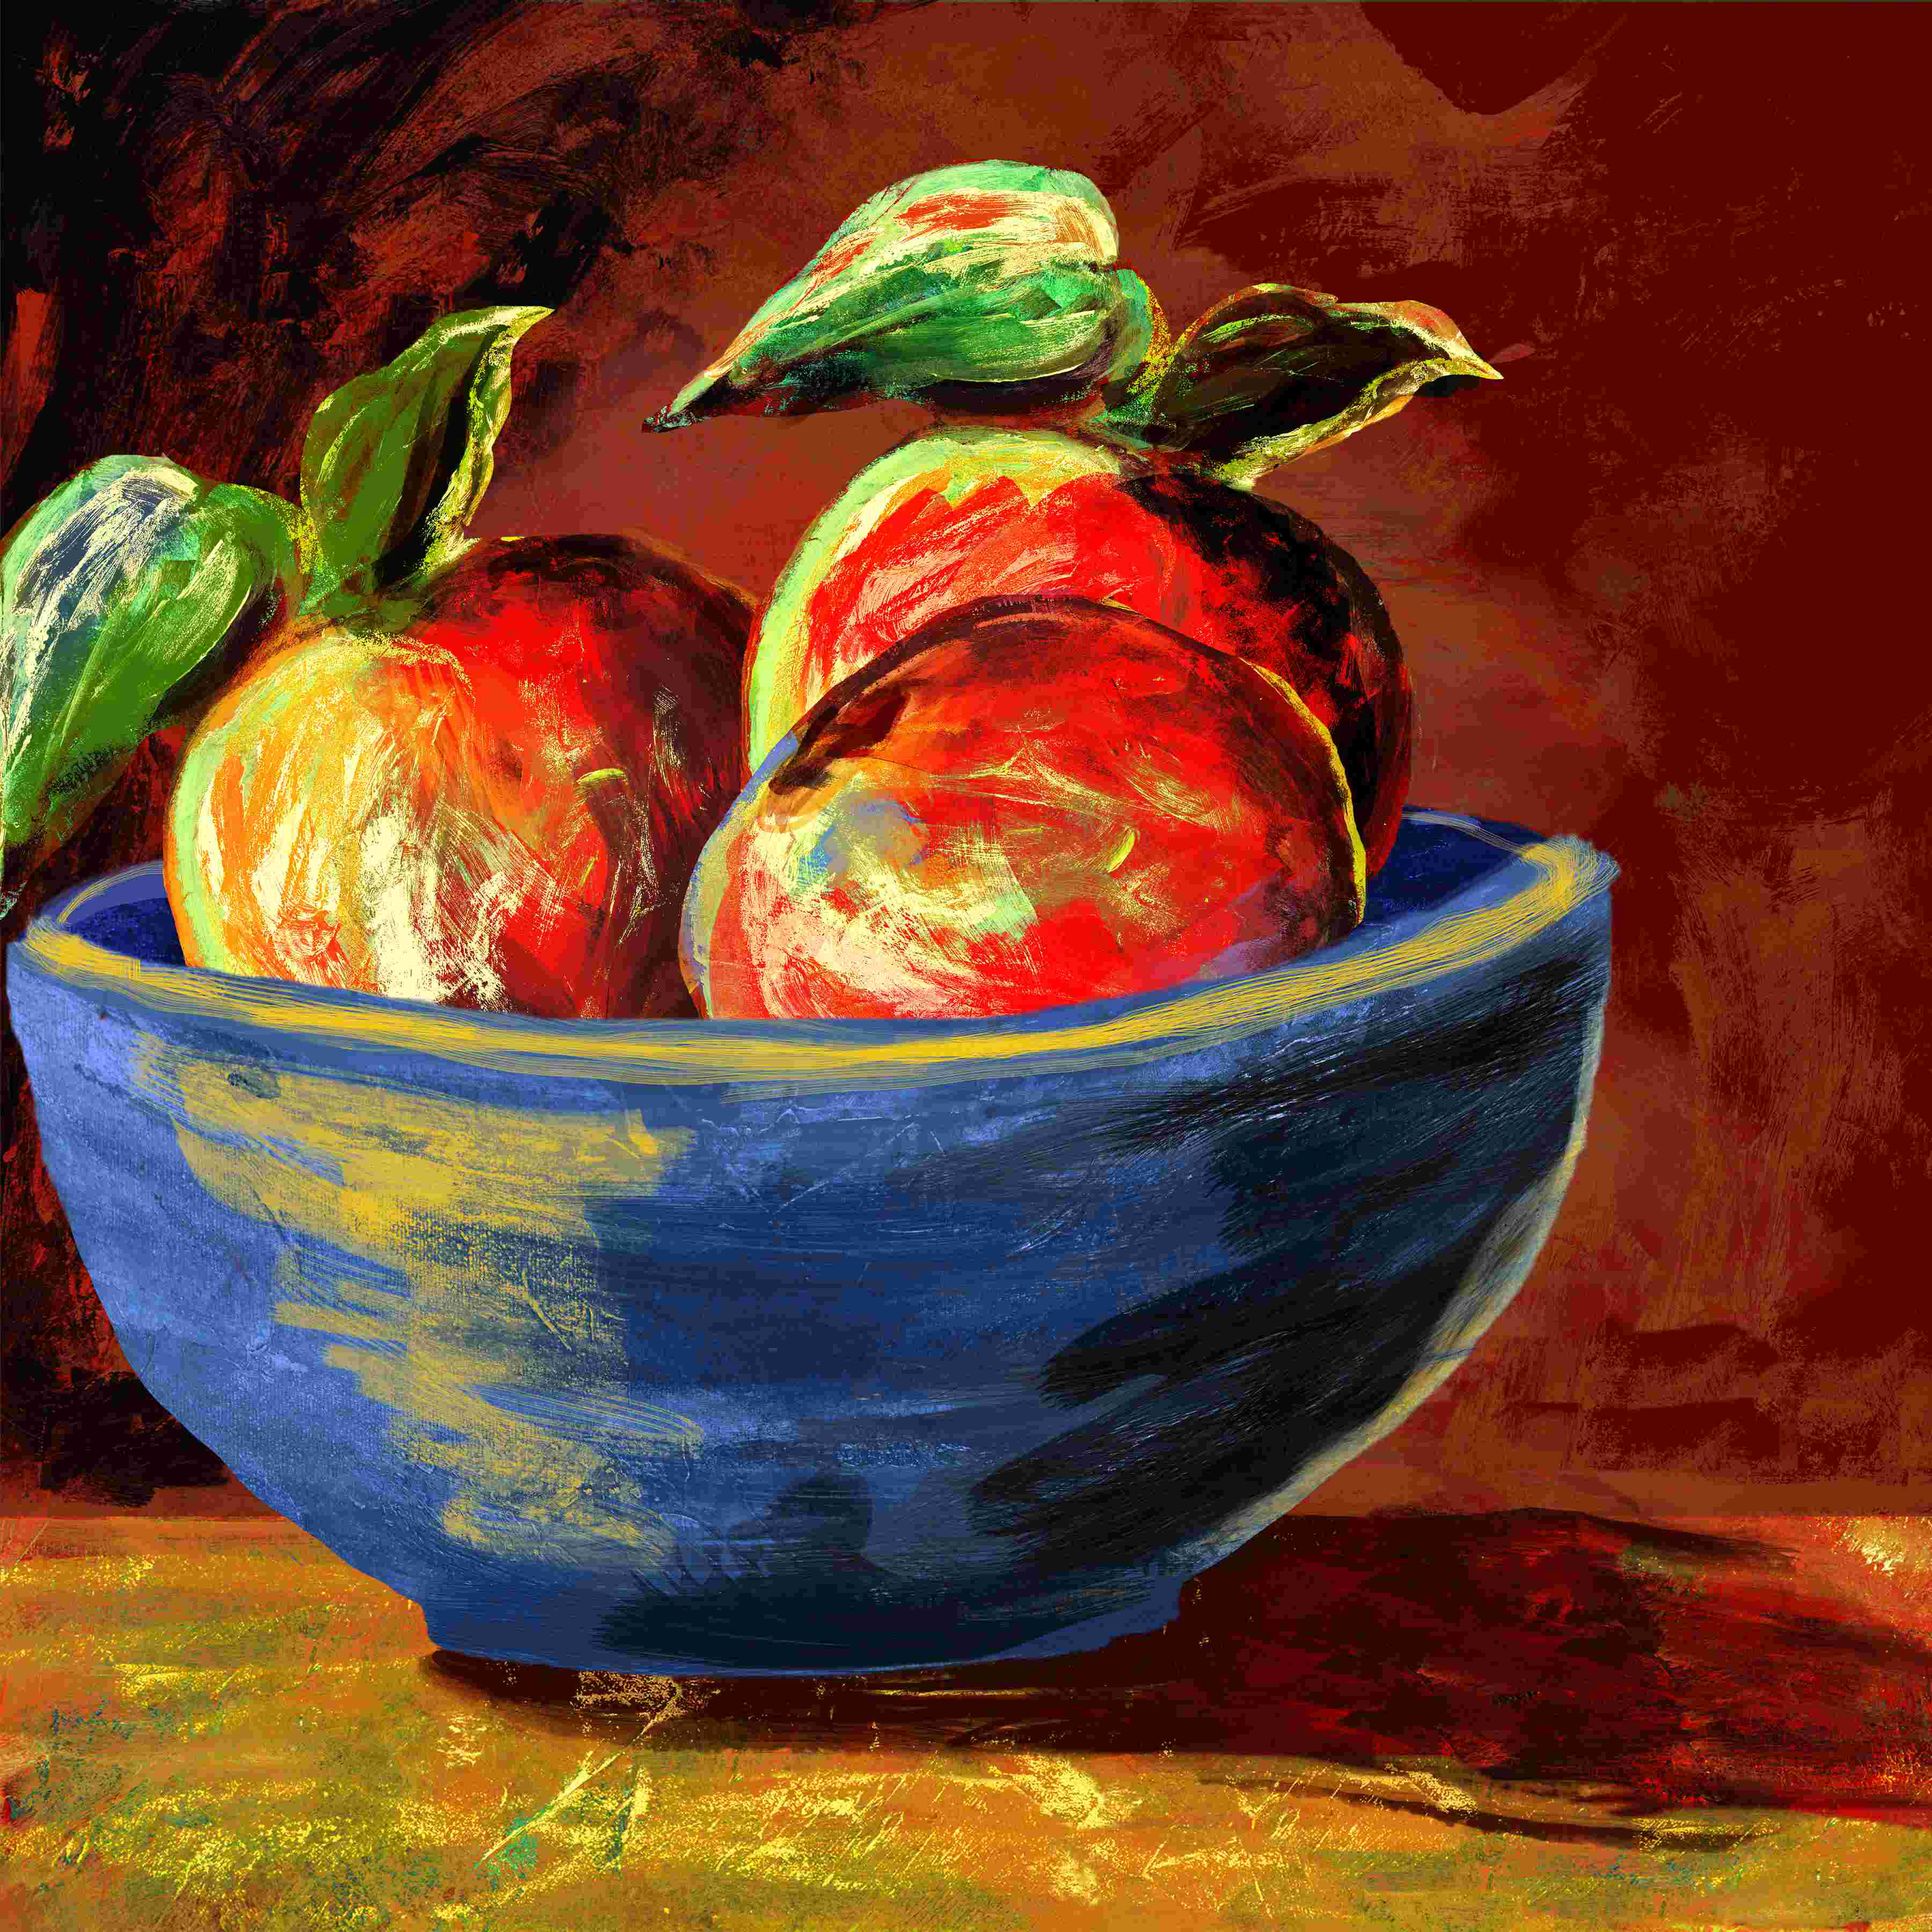 Painterly Fruit Bowl - Wrapped Canvas Graphic Art Charlton Home Size: 30 W x 30 H